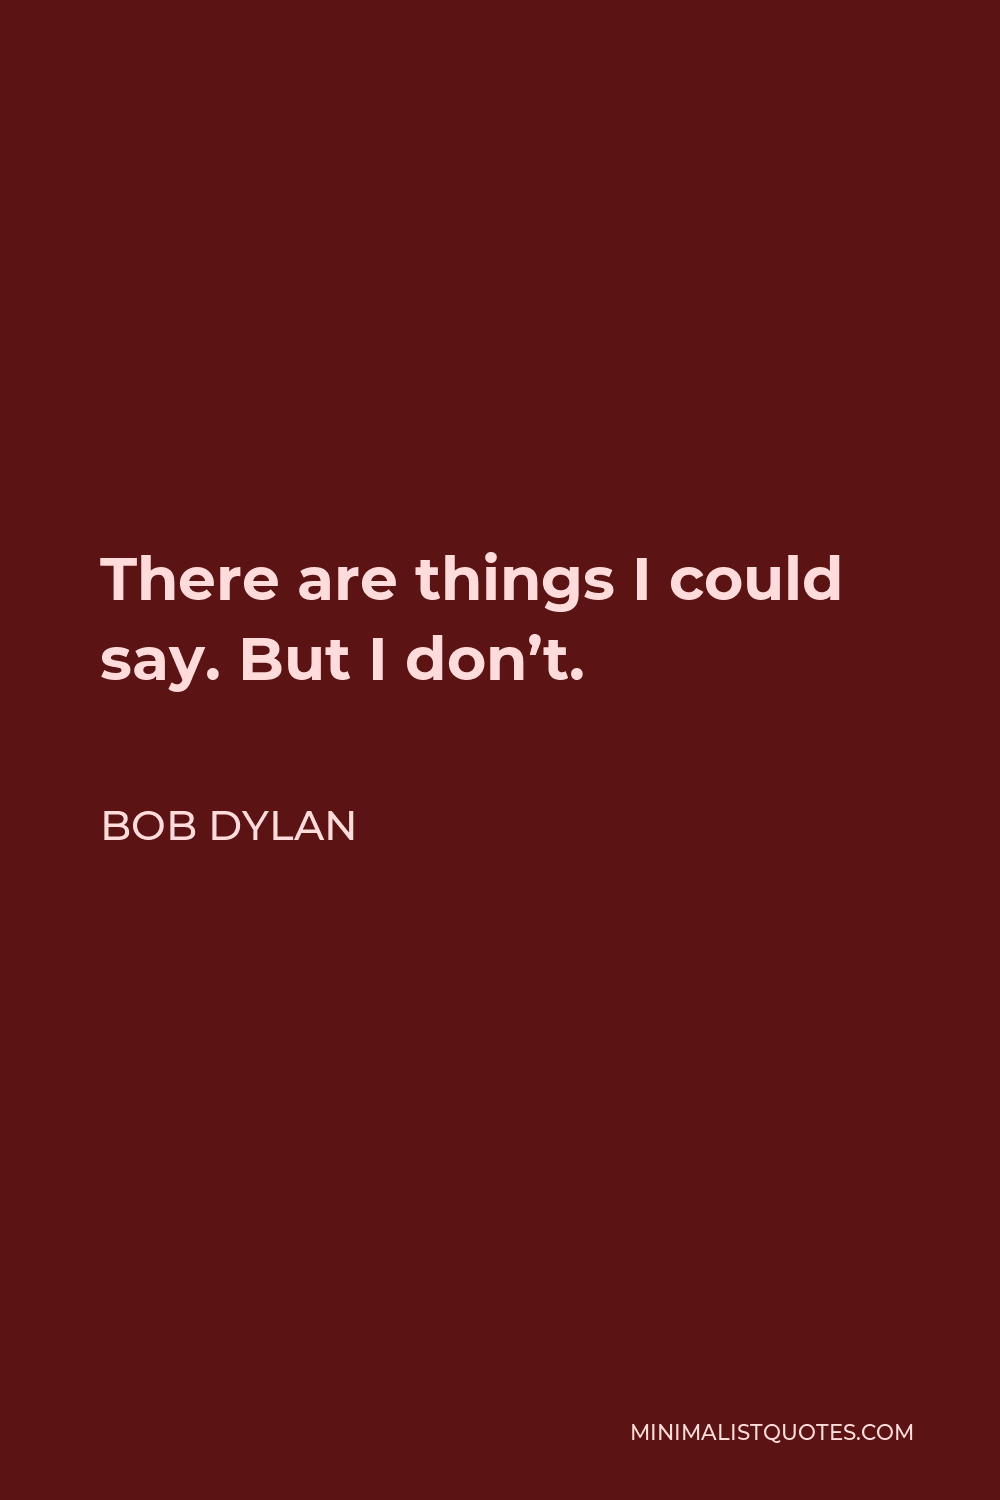 Bob Dylan Quote - There are things I could say. But I don’t.